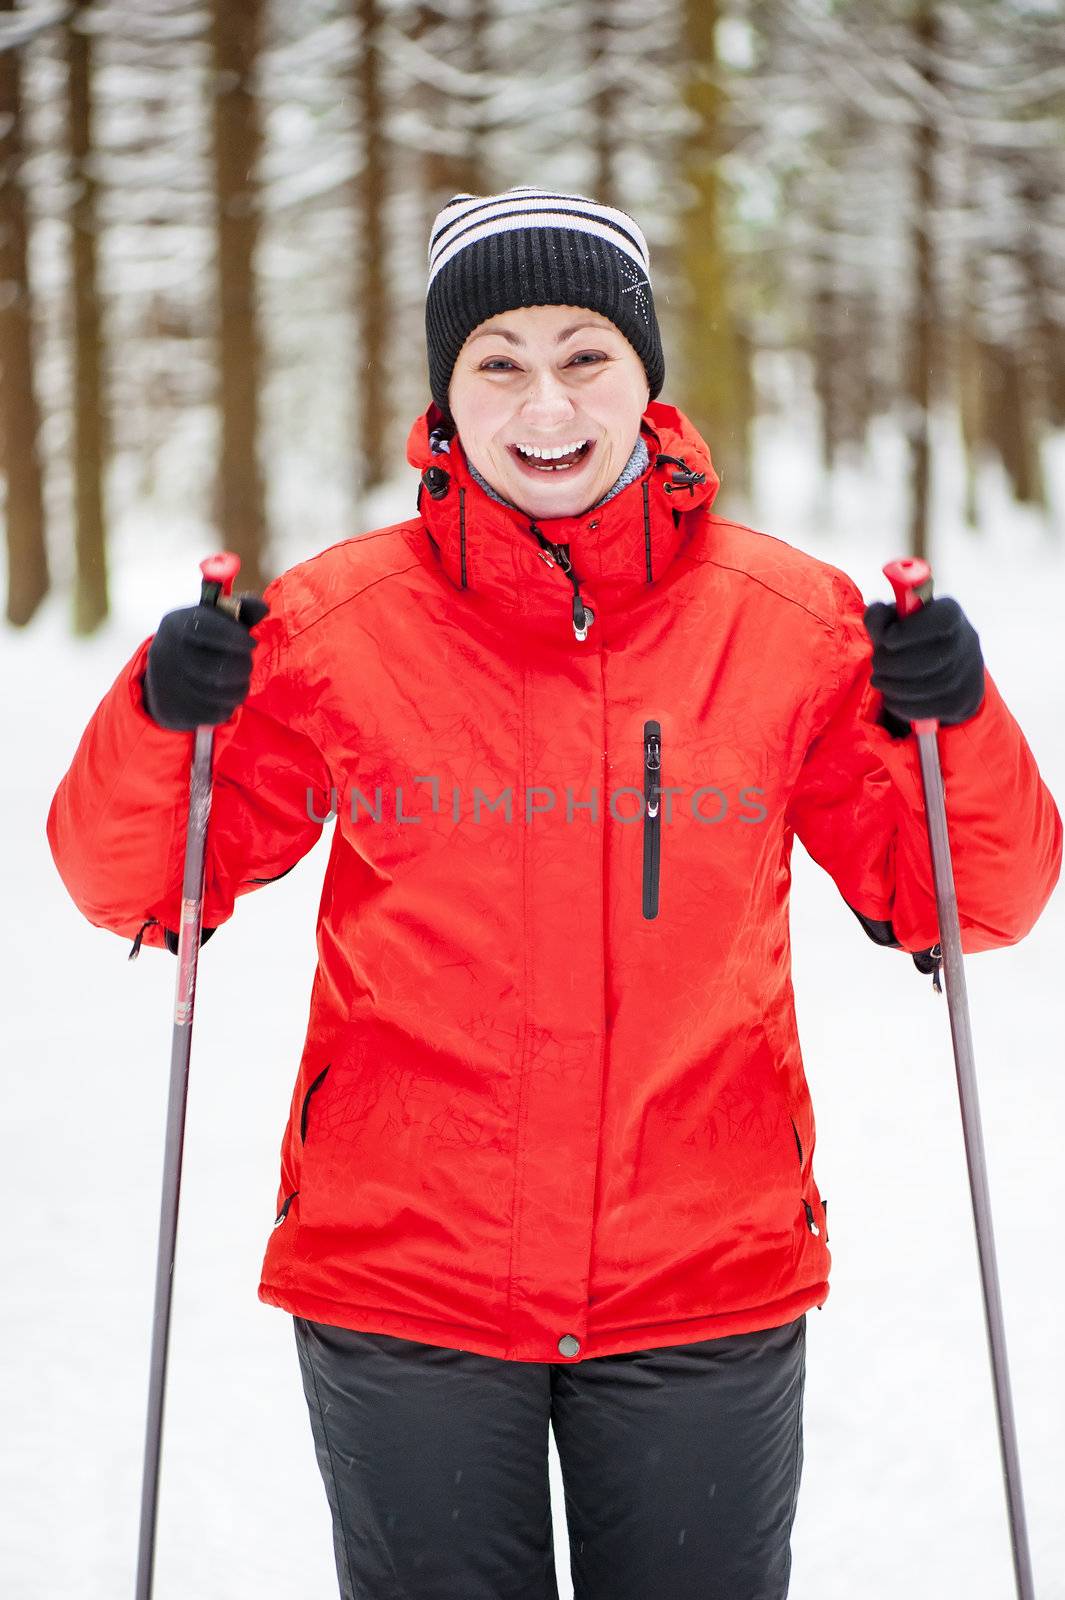 Happy girl posing on skis in the winter woods. by kosmsos111